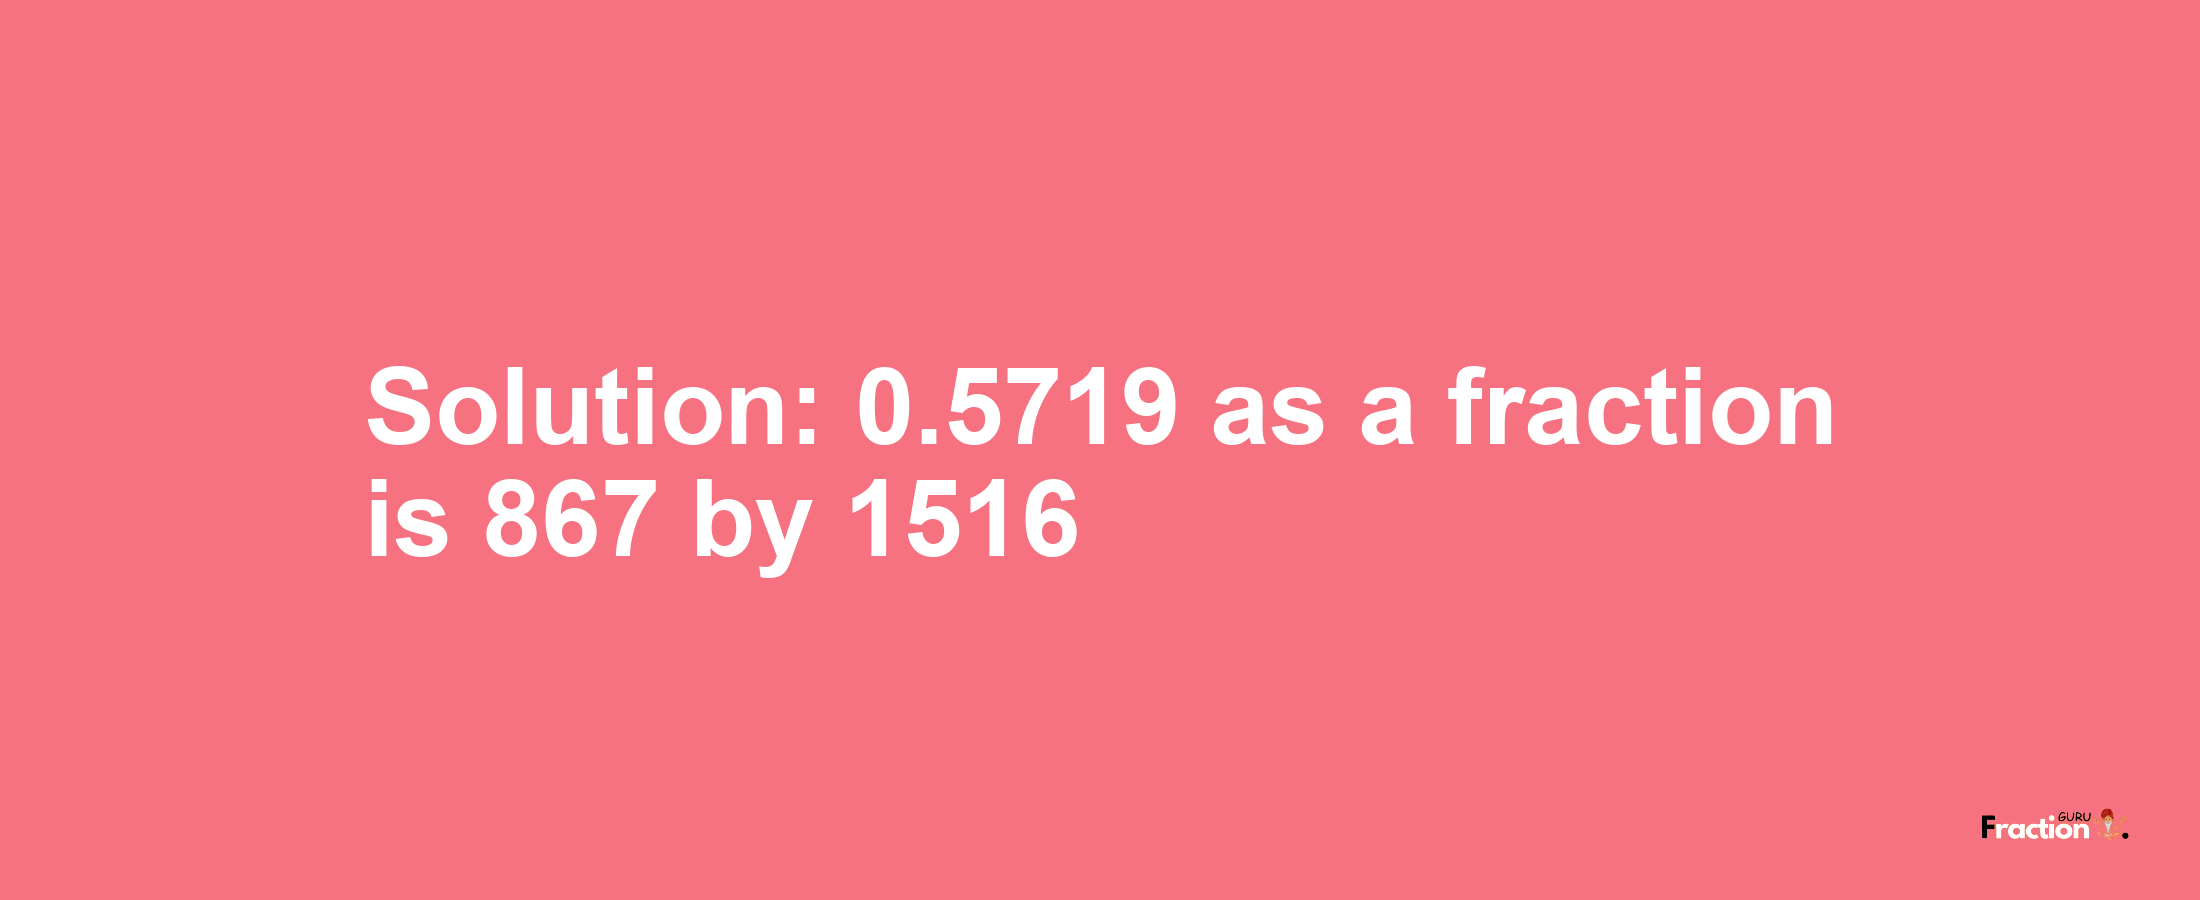 Solution:0.5719 as a fraction is 867/1516